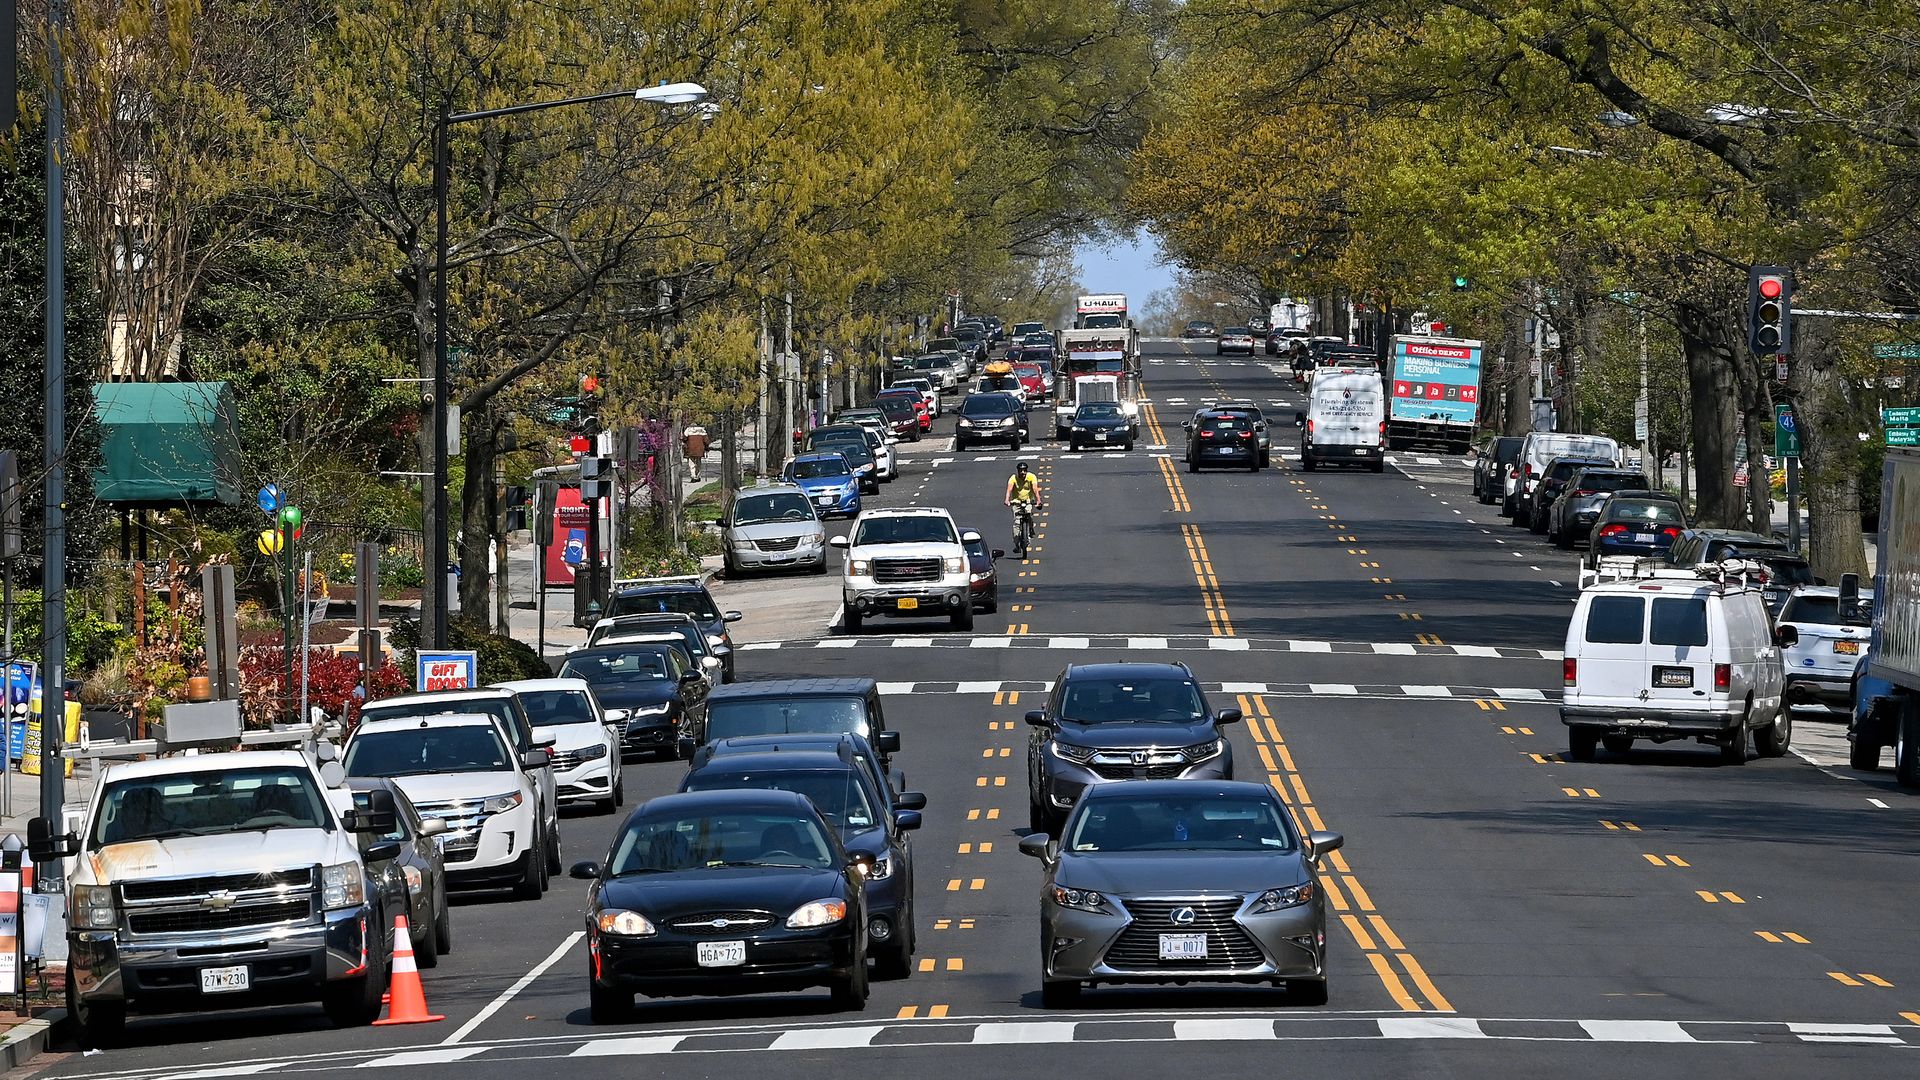 Cars wait at a stop light on a tree-lined street.